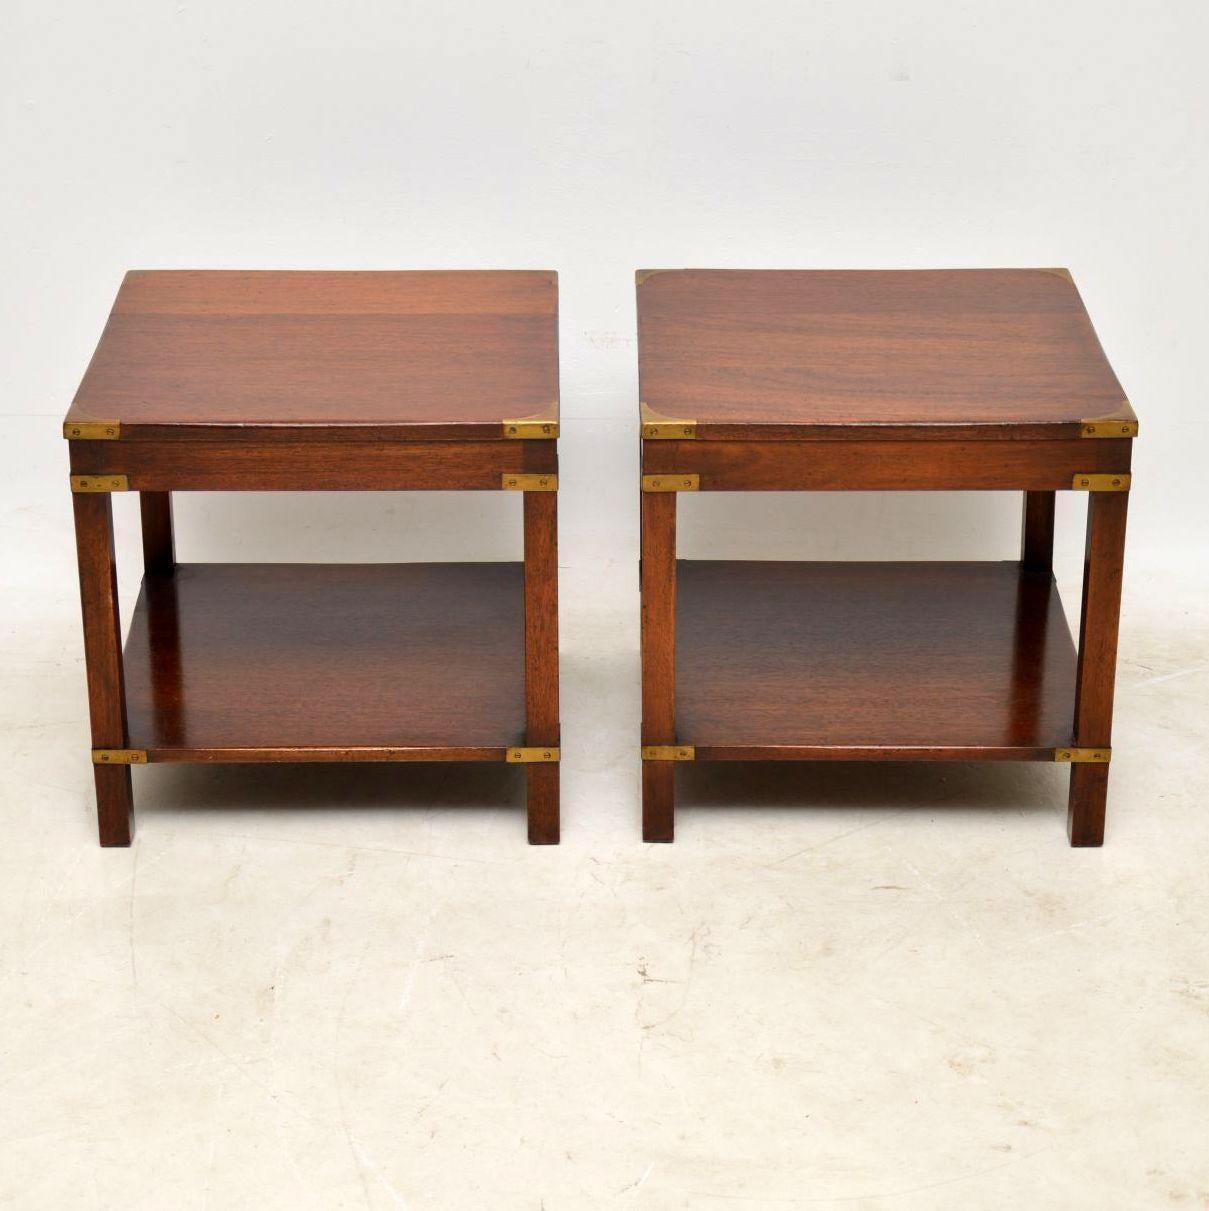 Pair of antique Campaign style mahogany and brass side tables in good condition, dating to circa 1950s period. These types of table are very useful either side of a sofa and great for putting lamps on, plus magazines underneath.

Measures: Width –